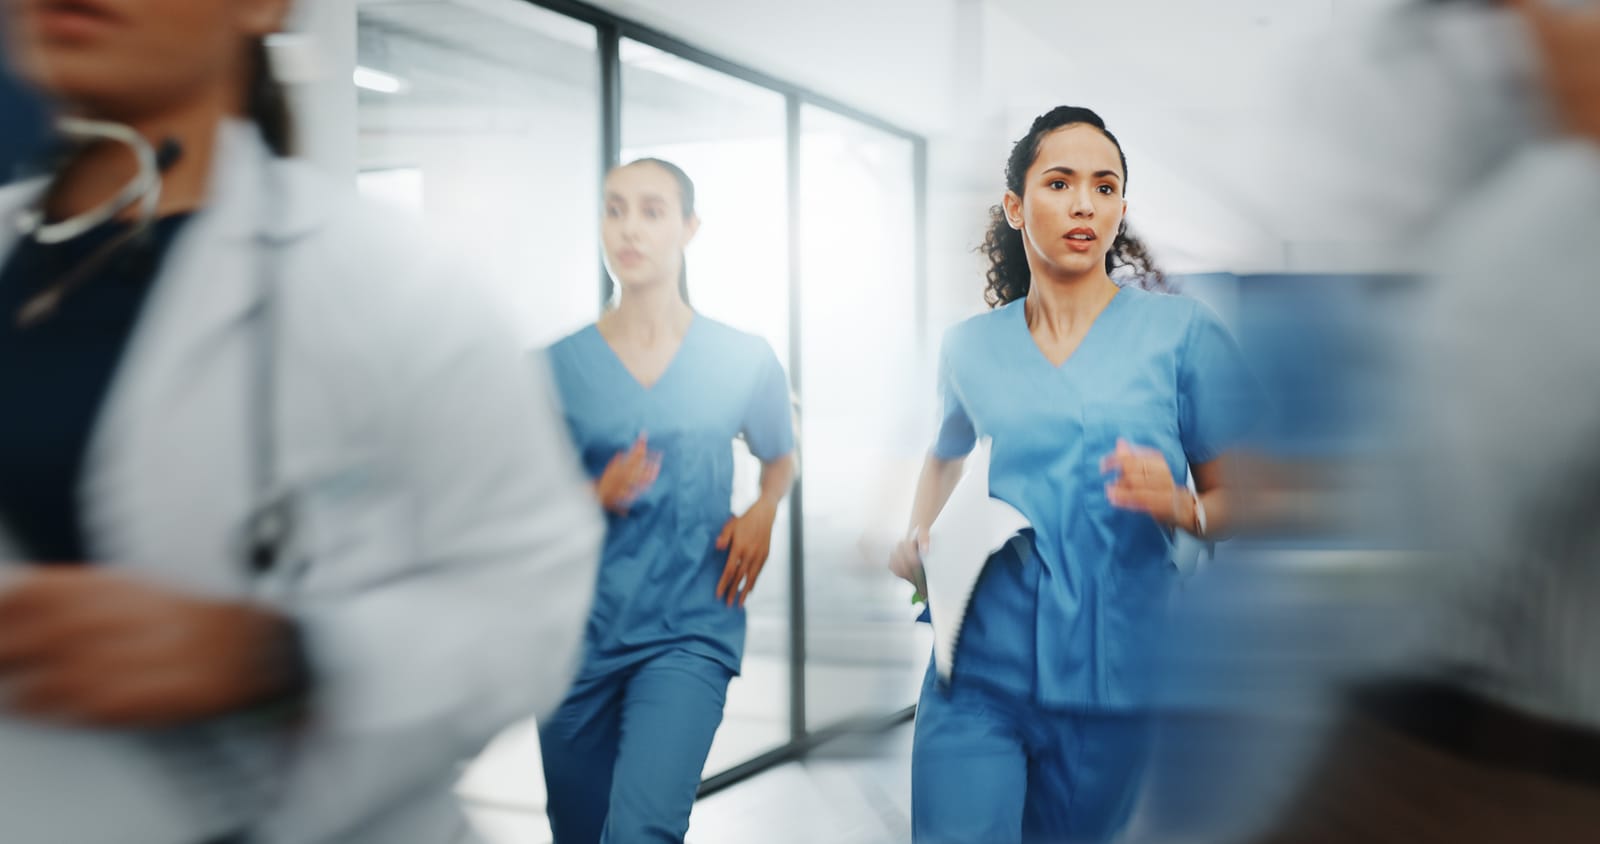 Stressed and overwhelmed nurses working image